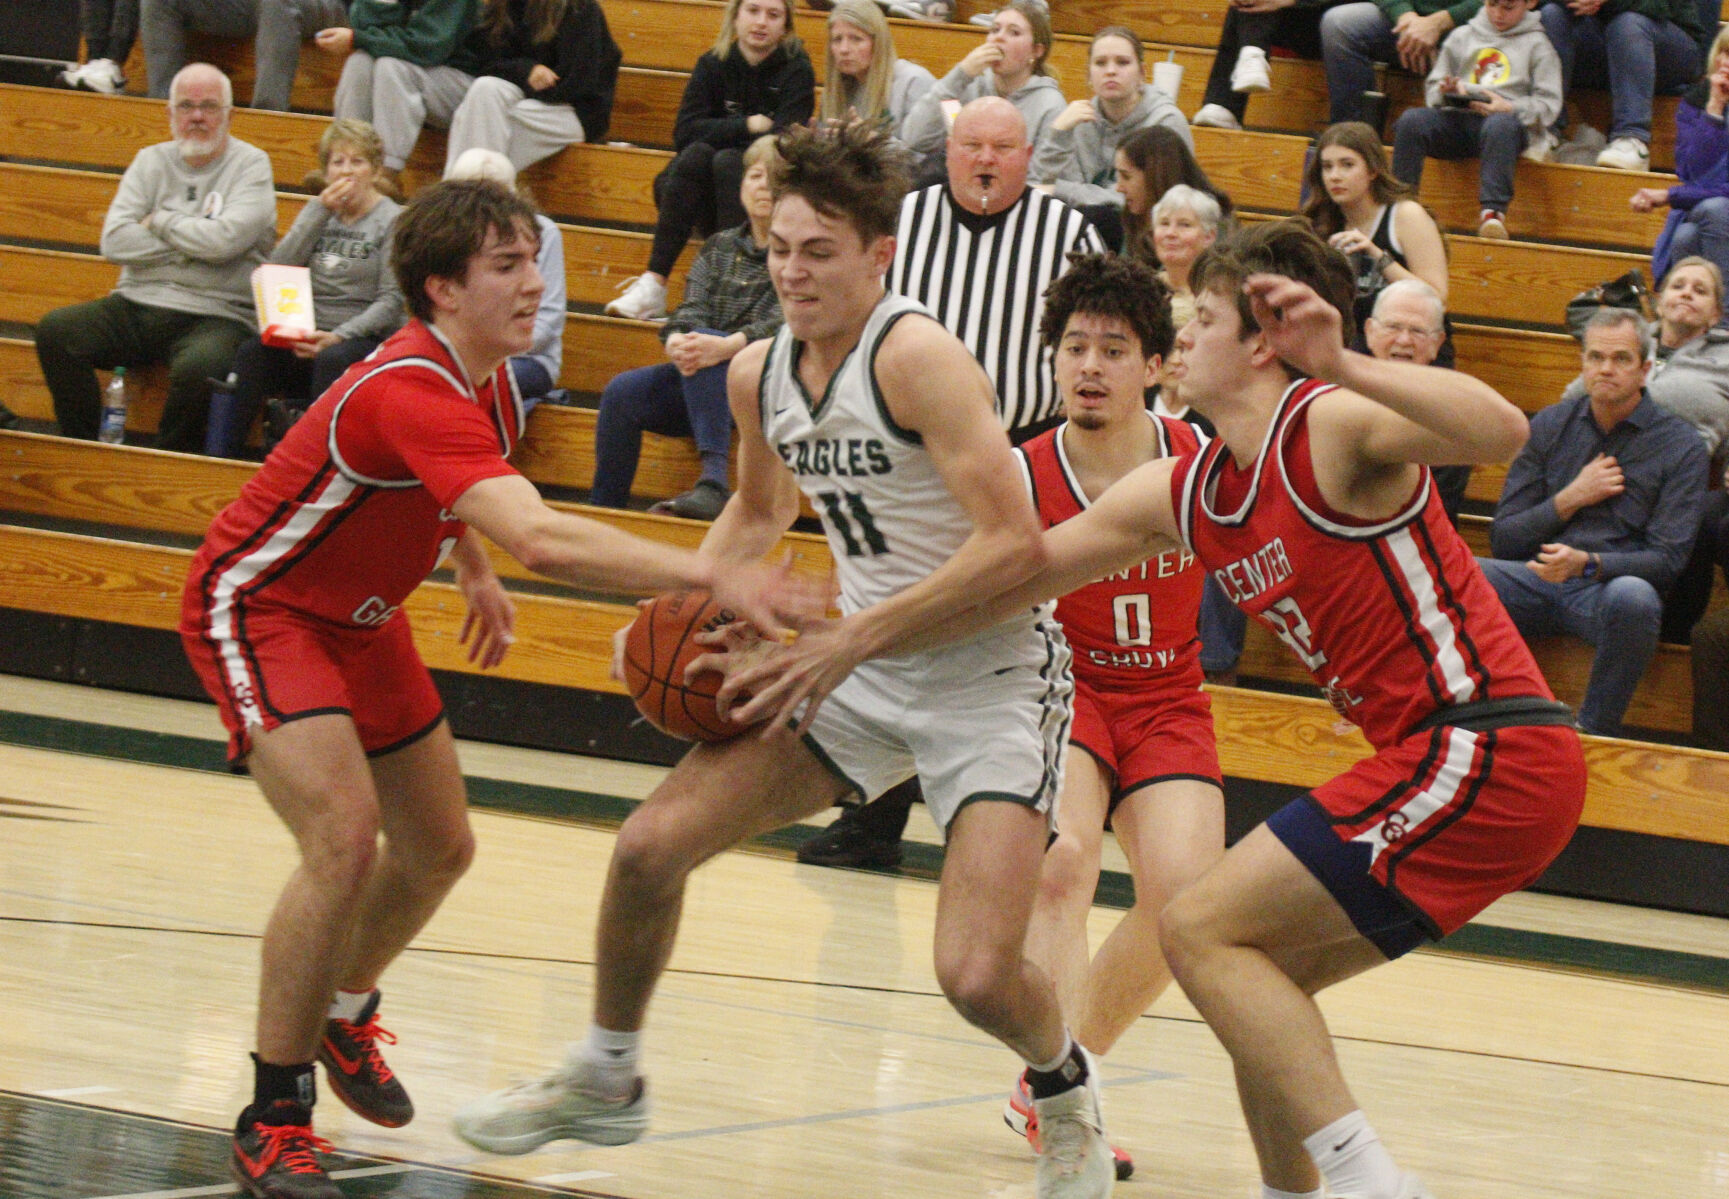 Center Grove dominates Zionsville in high school basketball game with 60-49 win